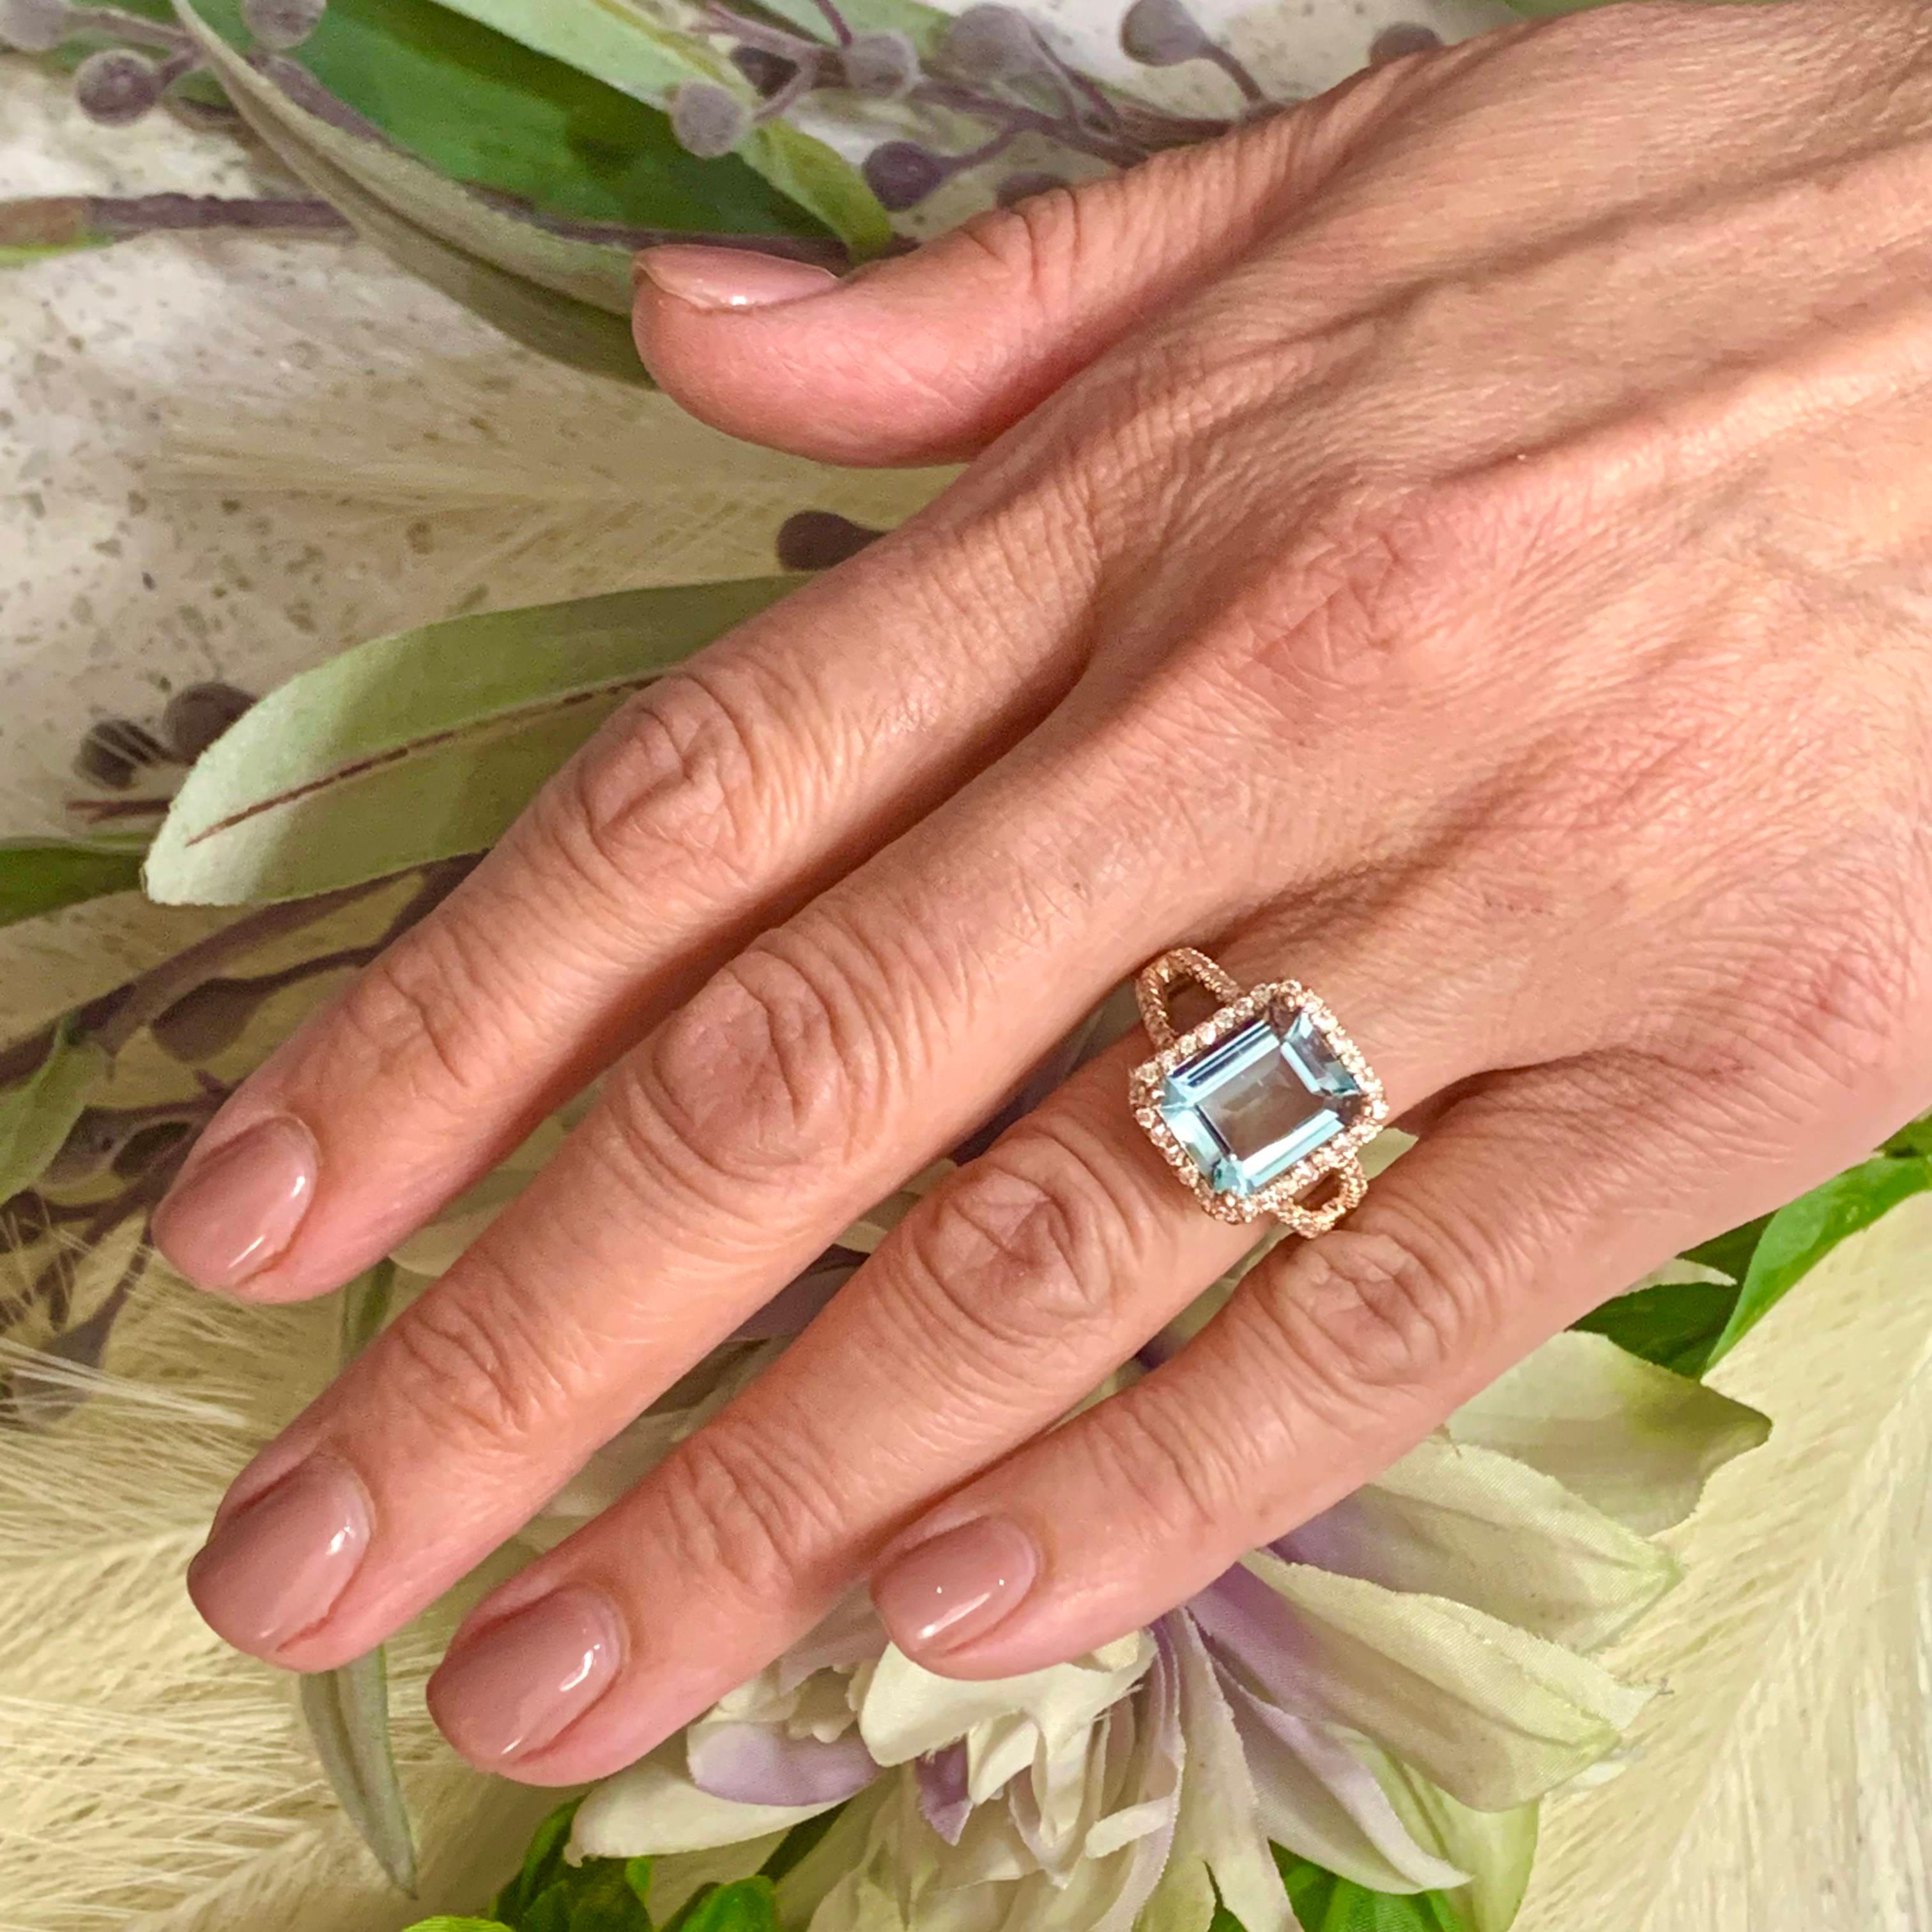 Natural Finely Faceted Quality Aquamarine Diamond Ring Size 6.5 14k Gold 6.25 TCW Certified $6,950 120672

This is a Unique Custom Made Glamorous Piece of Jewelry!

Nothing says, “I Love you” more than Diamonds and Pearls!

This Aquamarine ring has